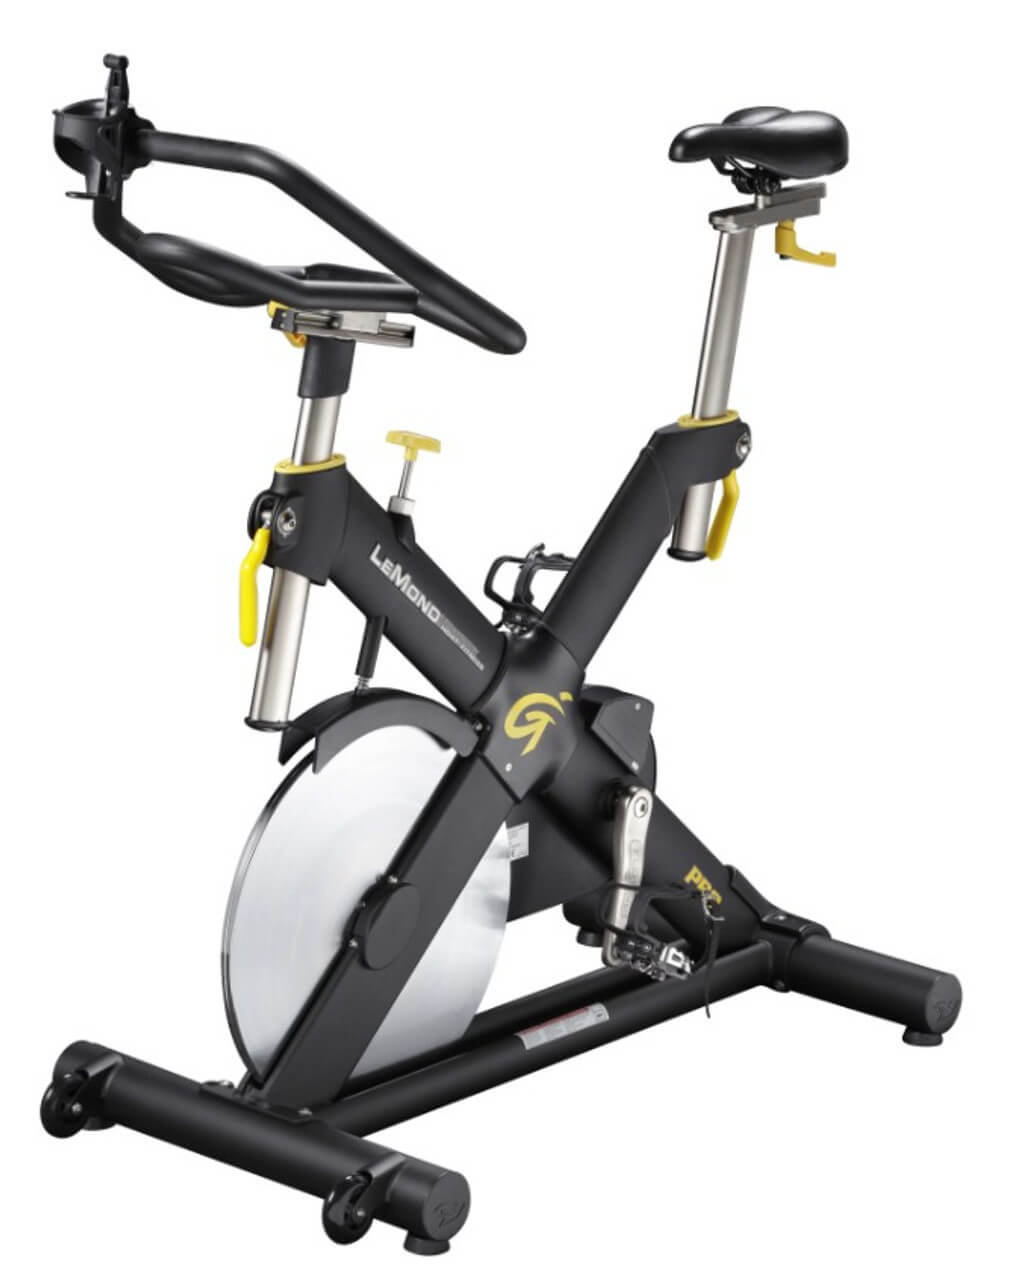 Lemond Revmaster Pro Indoor Cycling Bike.-New. Call Now For Lowest Pricing